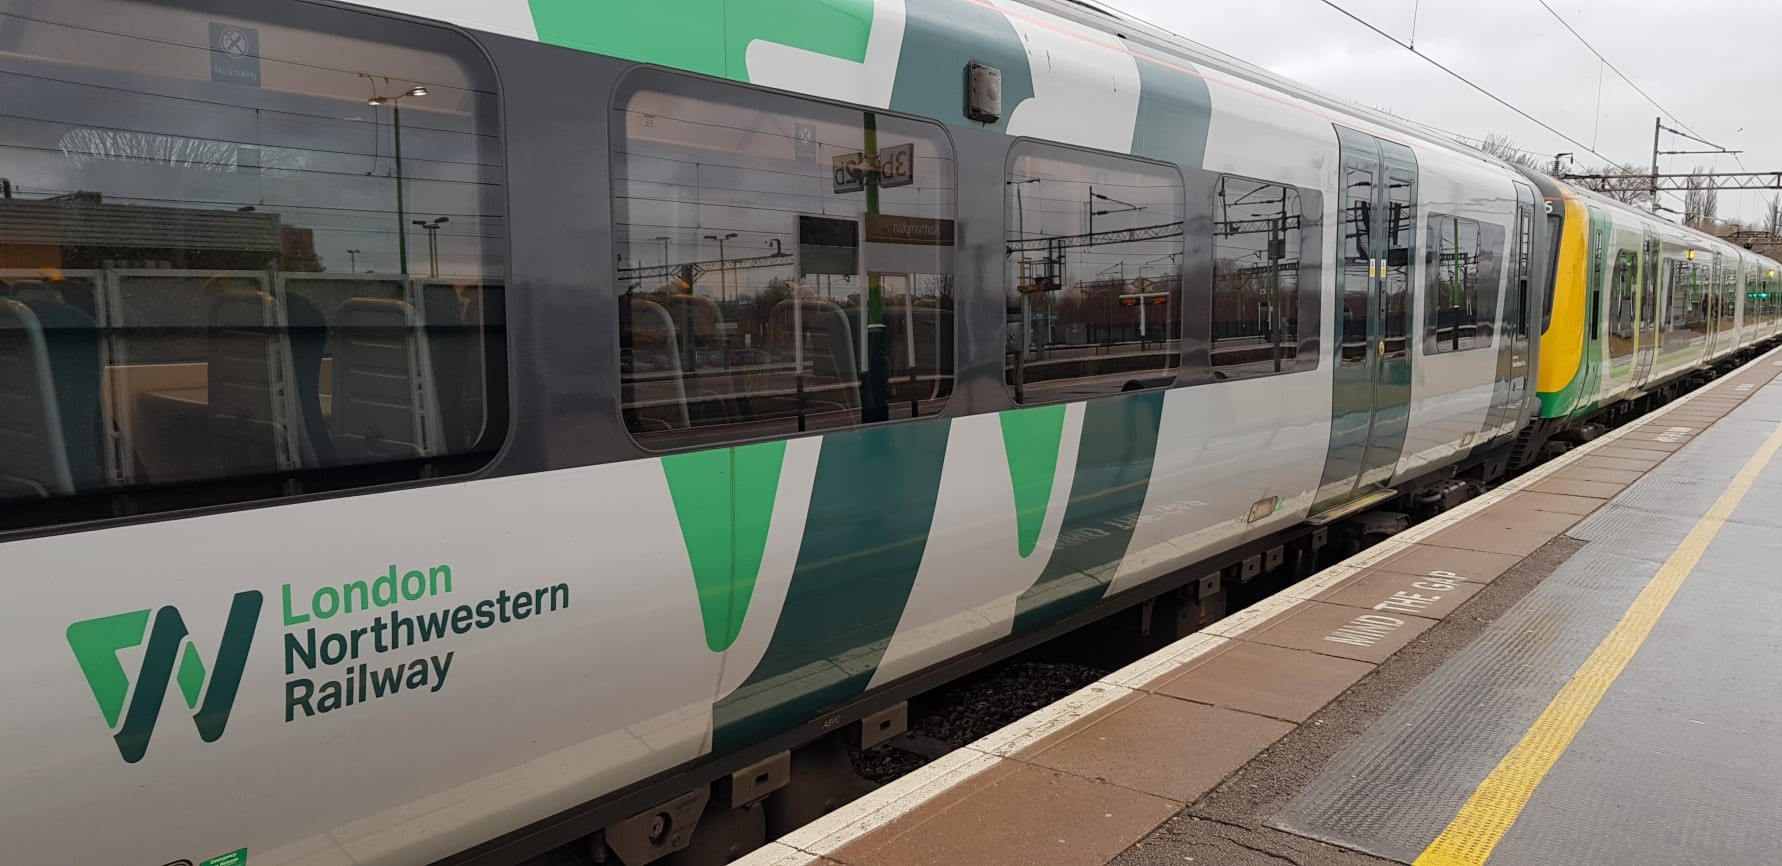 Passengers advised to check before travelling over Easter and early May bank holidays